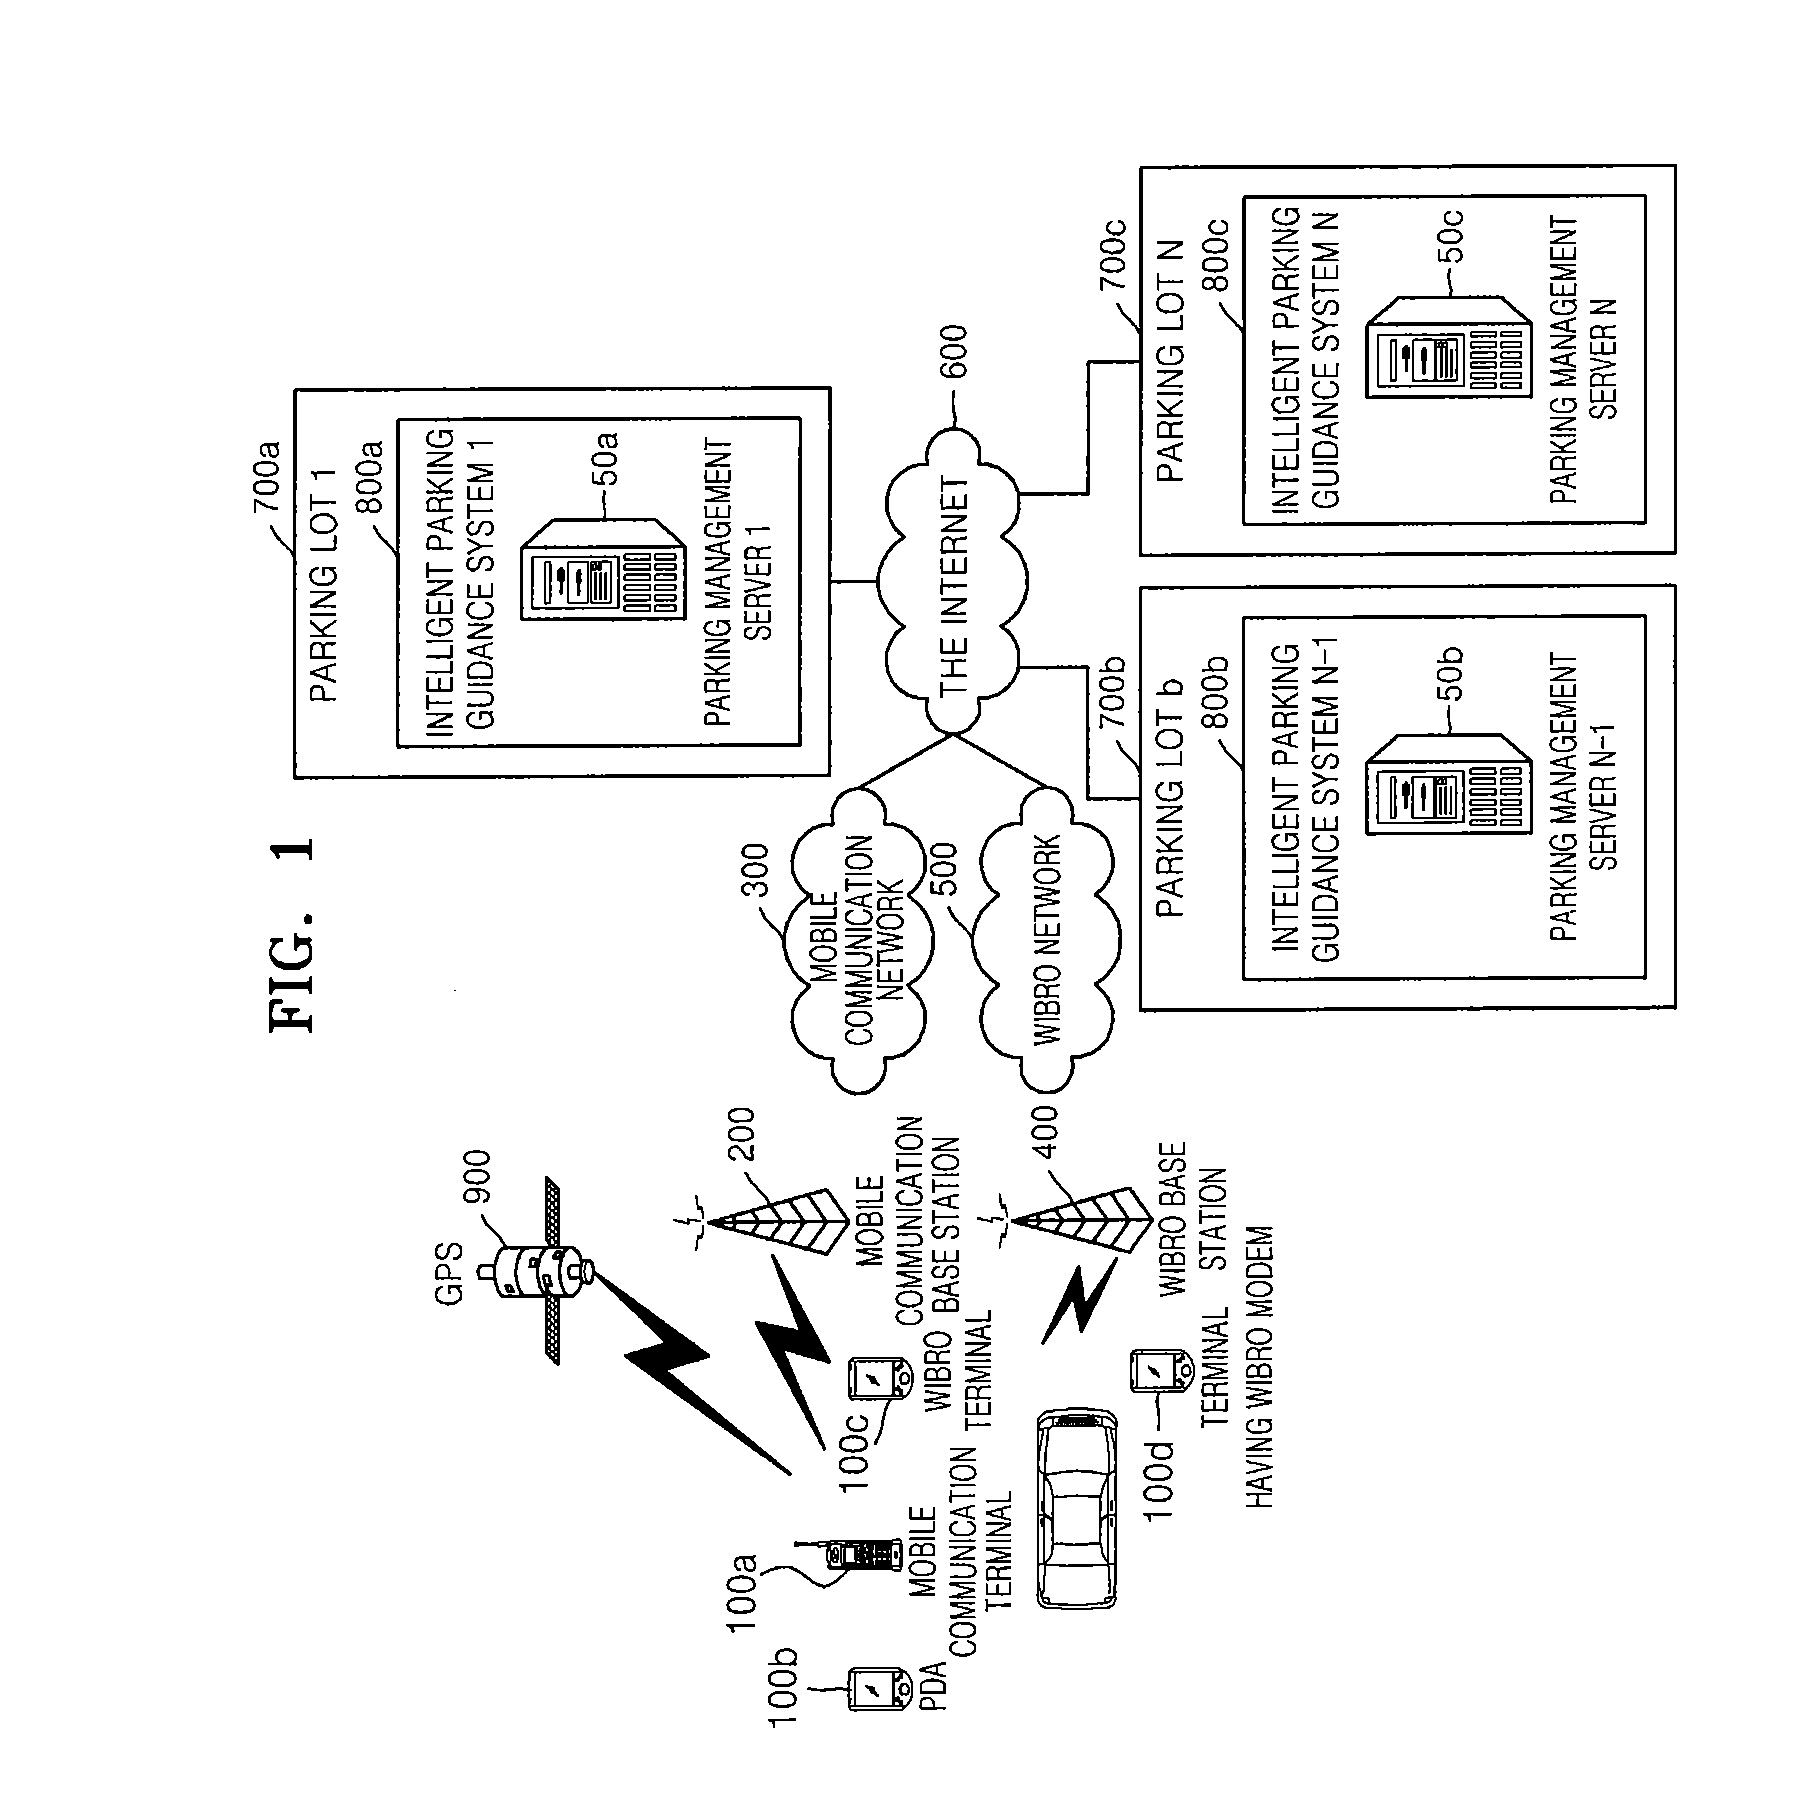 Intelligent parking guidance apparatus and method